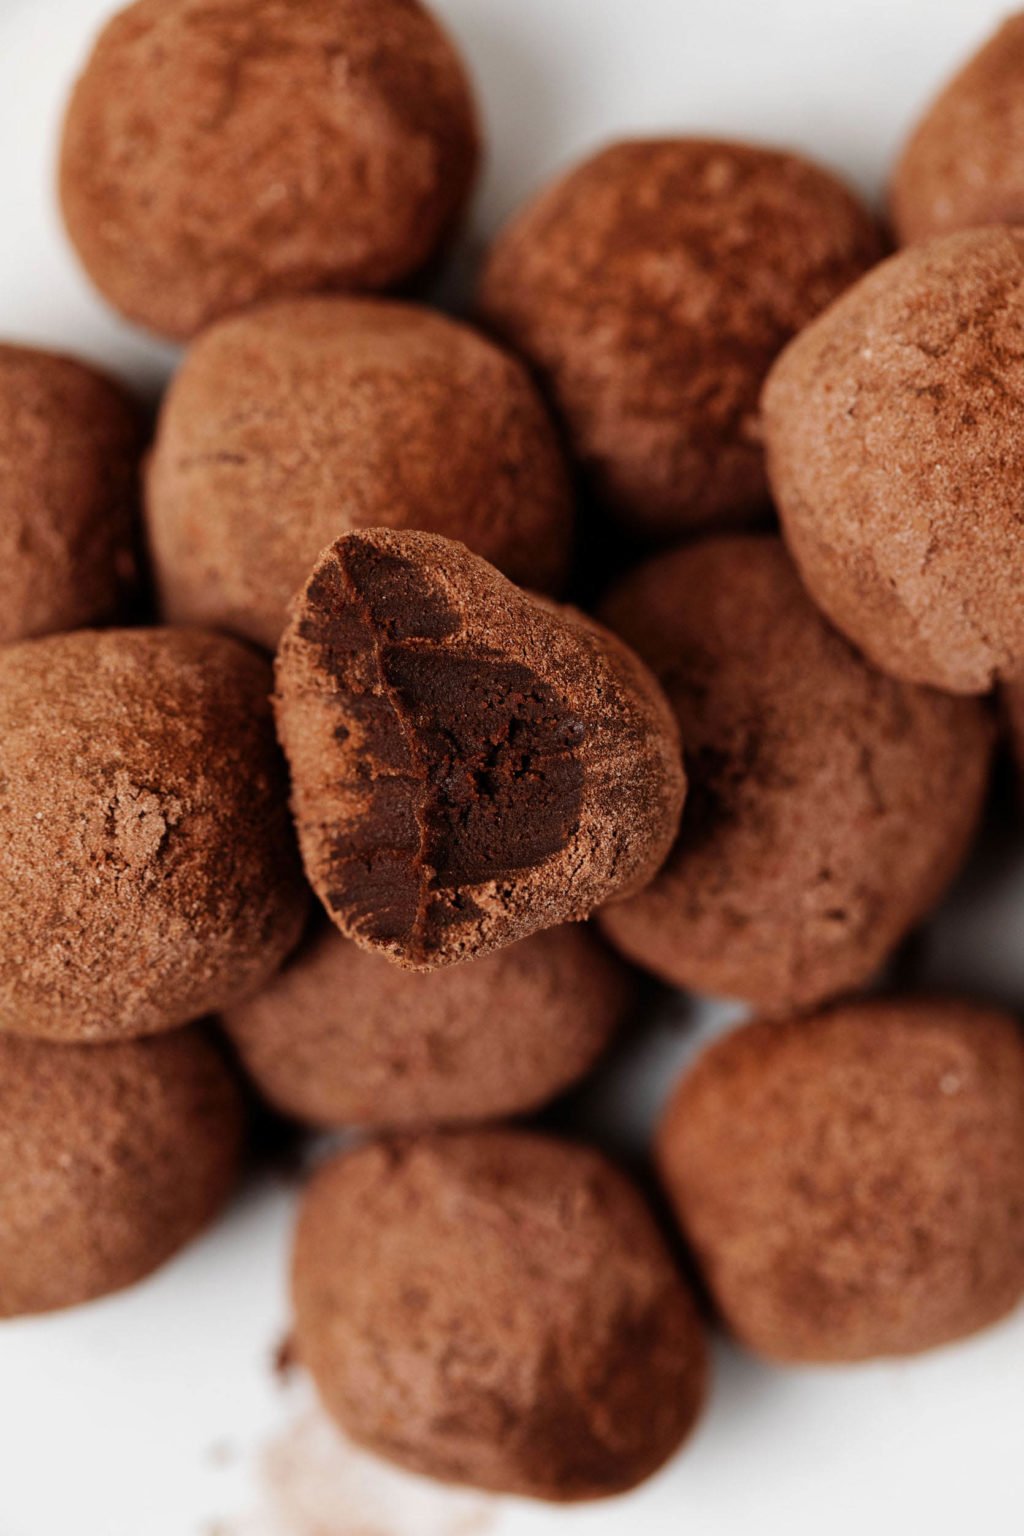 A zoomed in image of homemade chocolate confections.